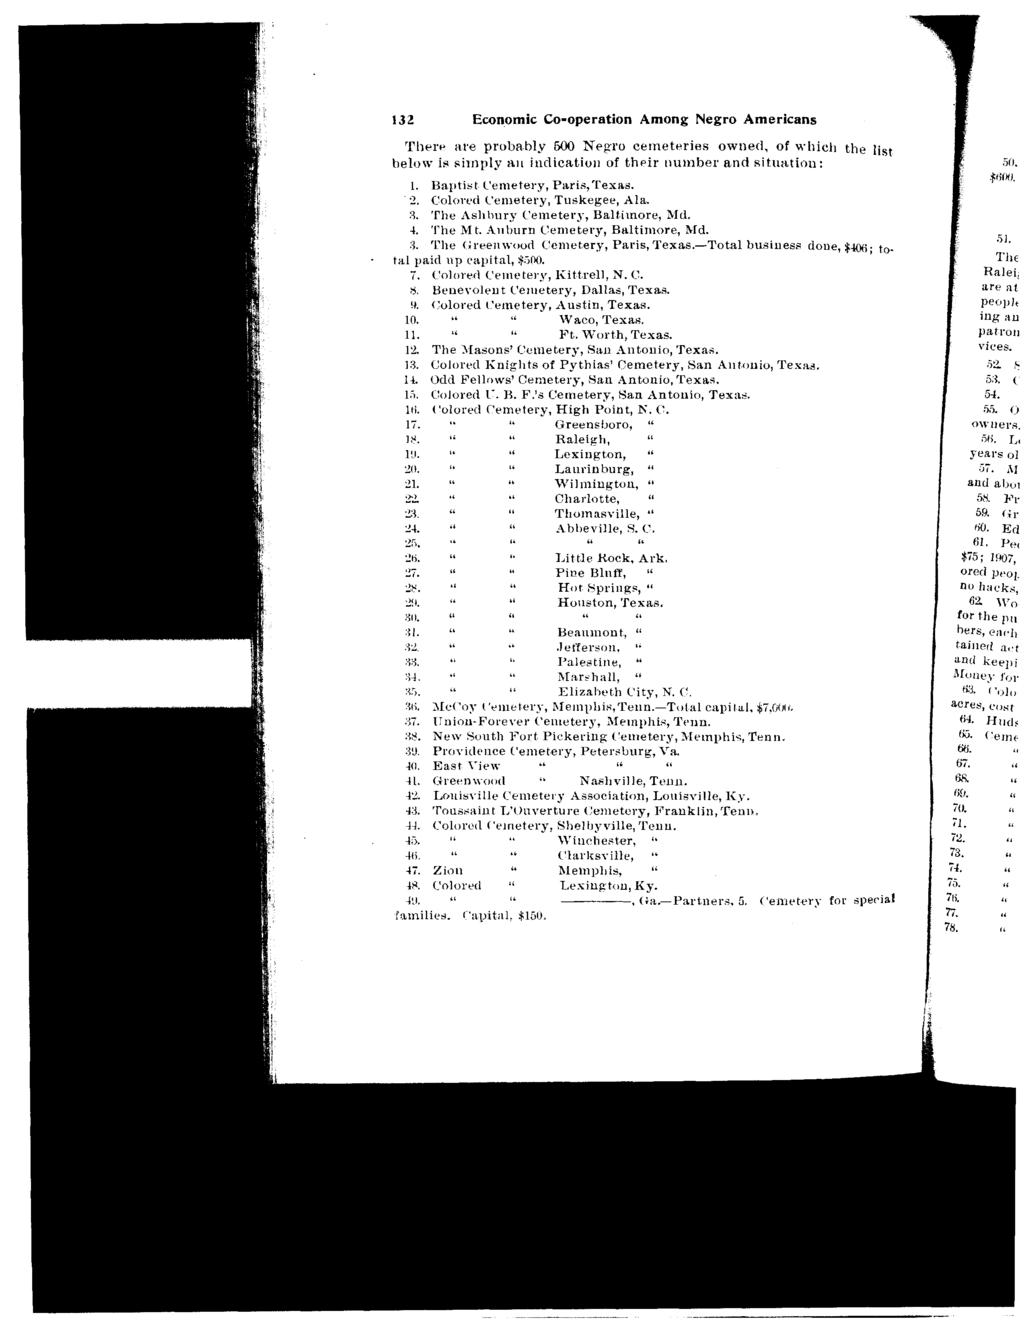 132 Economic Co-operation Among Negro Americans There are probably 500 Negro cemeteries owned, of which tlje list helow is simply all i~lclicntio~i of their number and situation: 1.